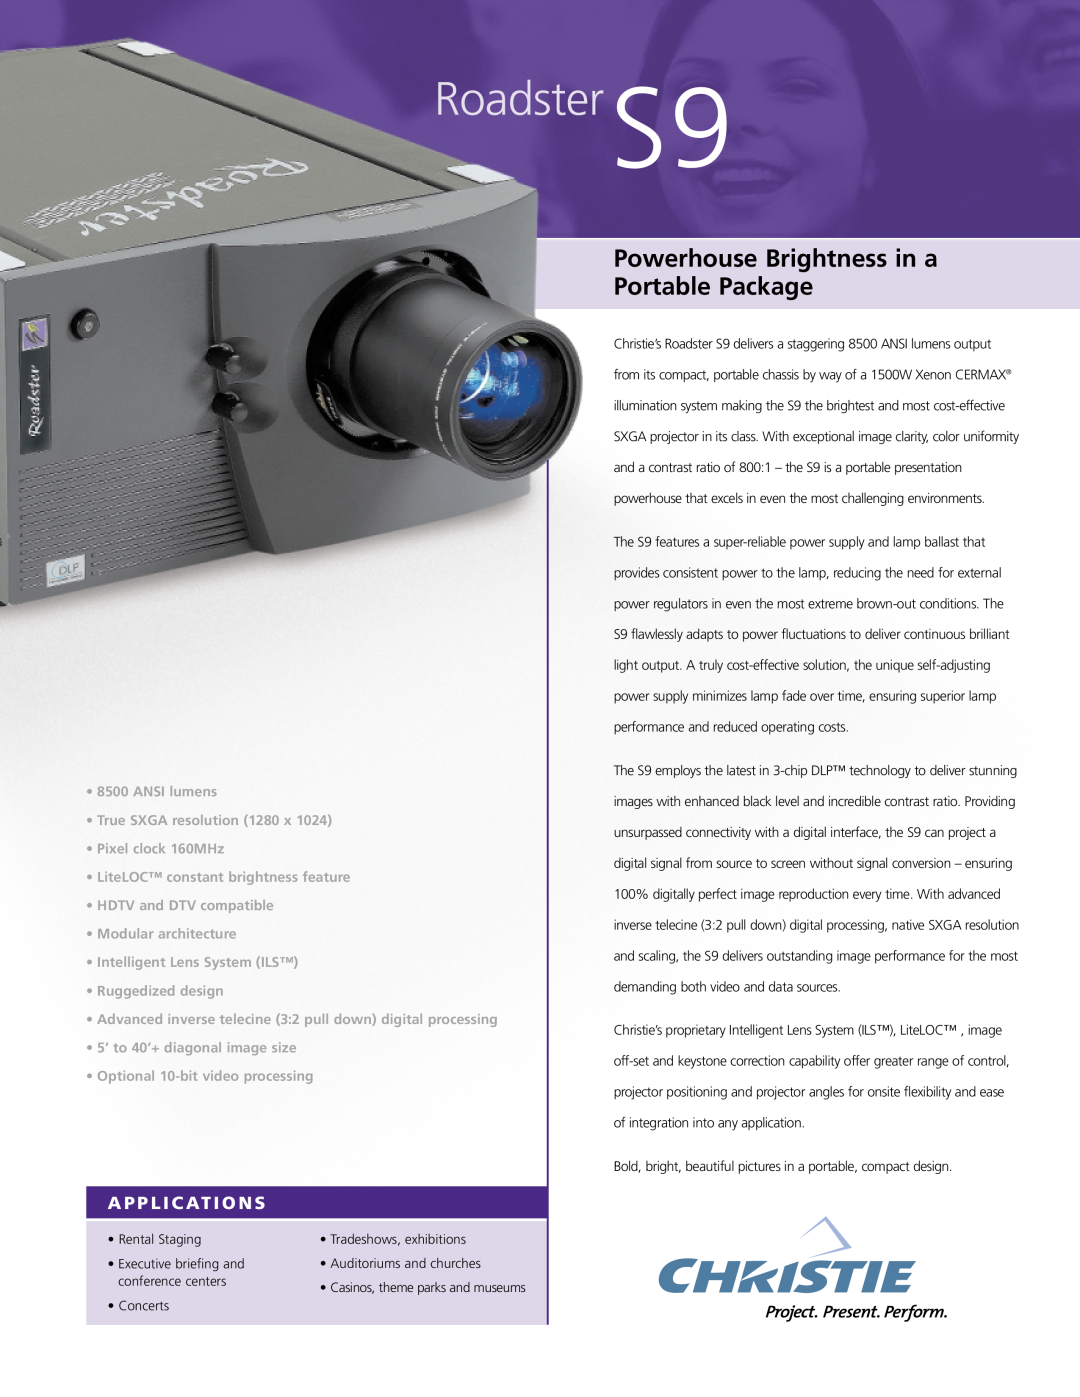 Christie Digital Systems manual A P P L I C At I O N S, Roadster S9, Powerhouse Brightness in a Portable Package 